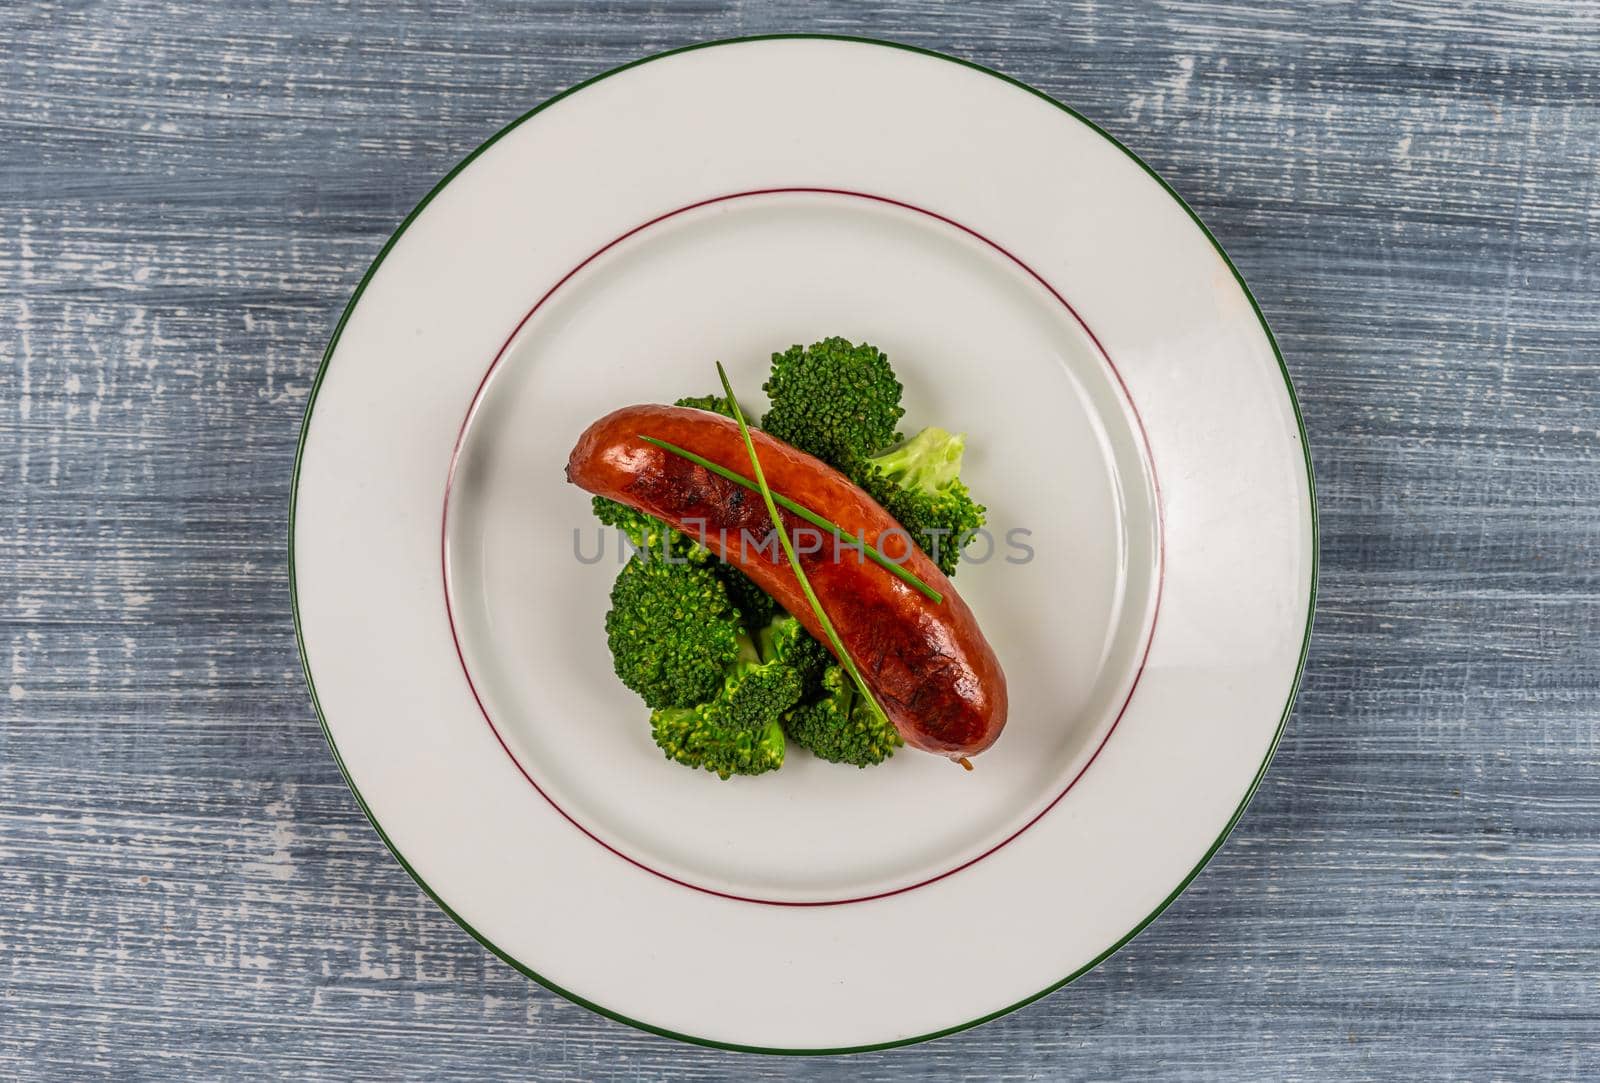 Sausage and broccoli on a plate -Top view